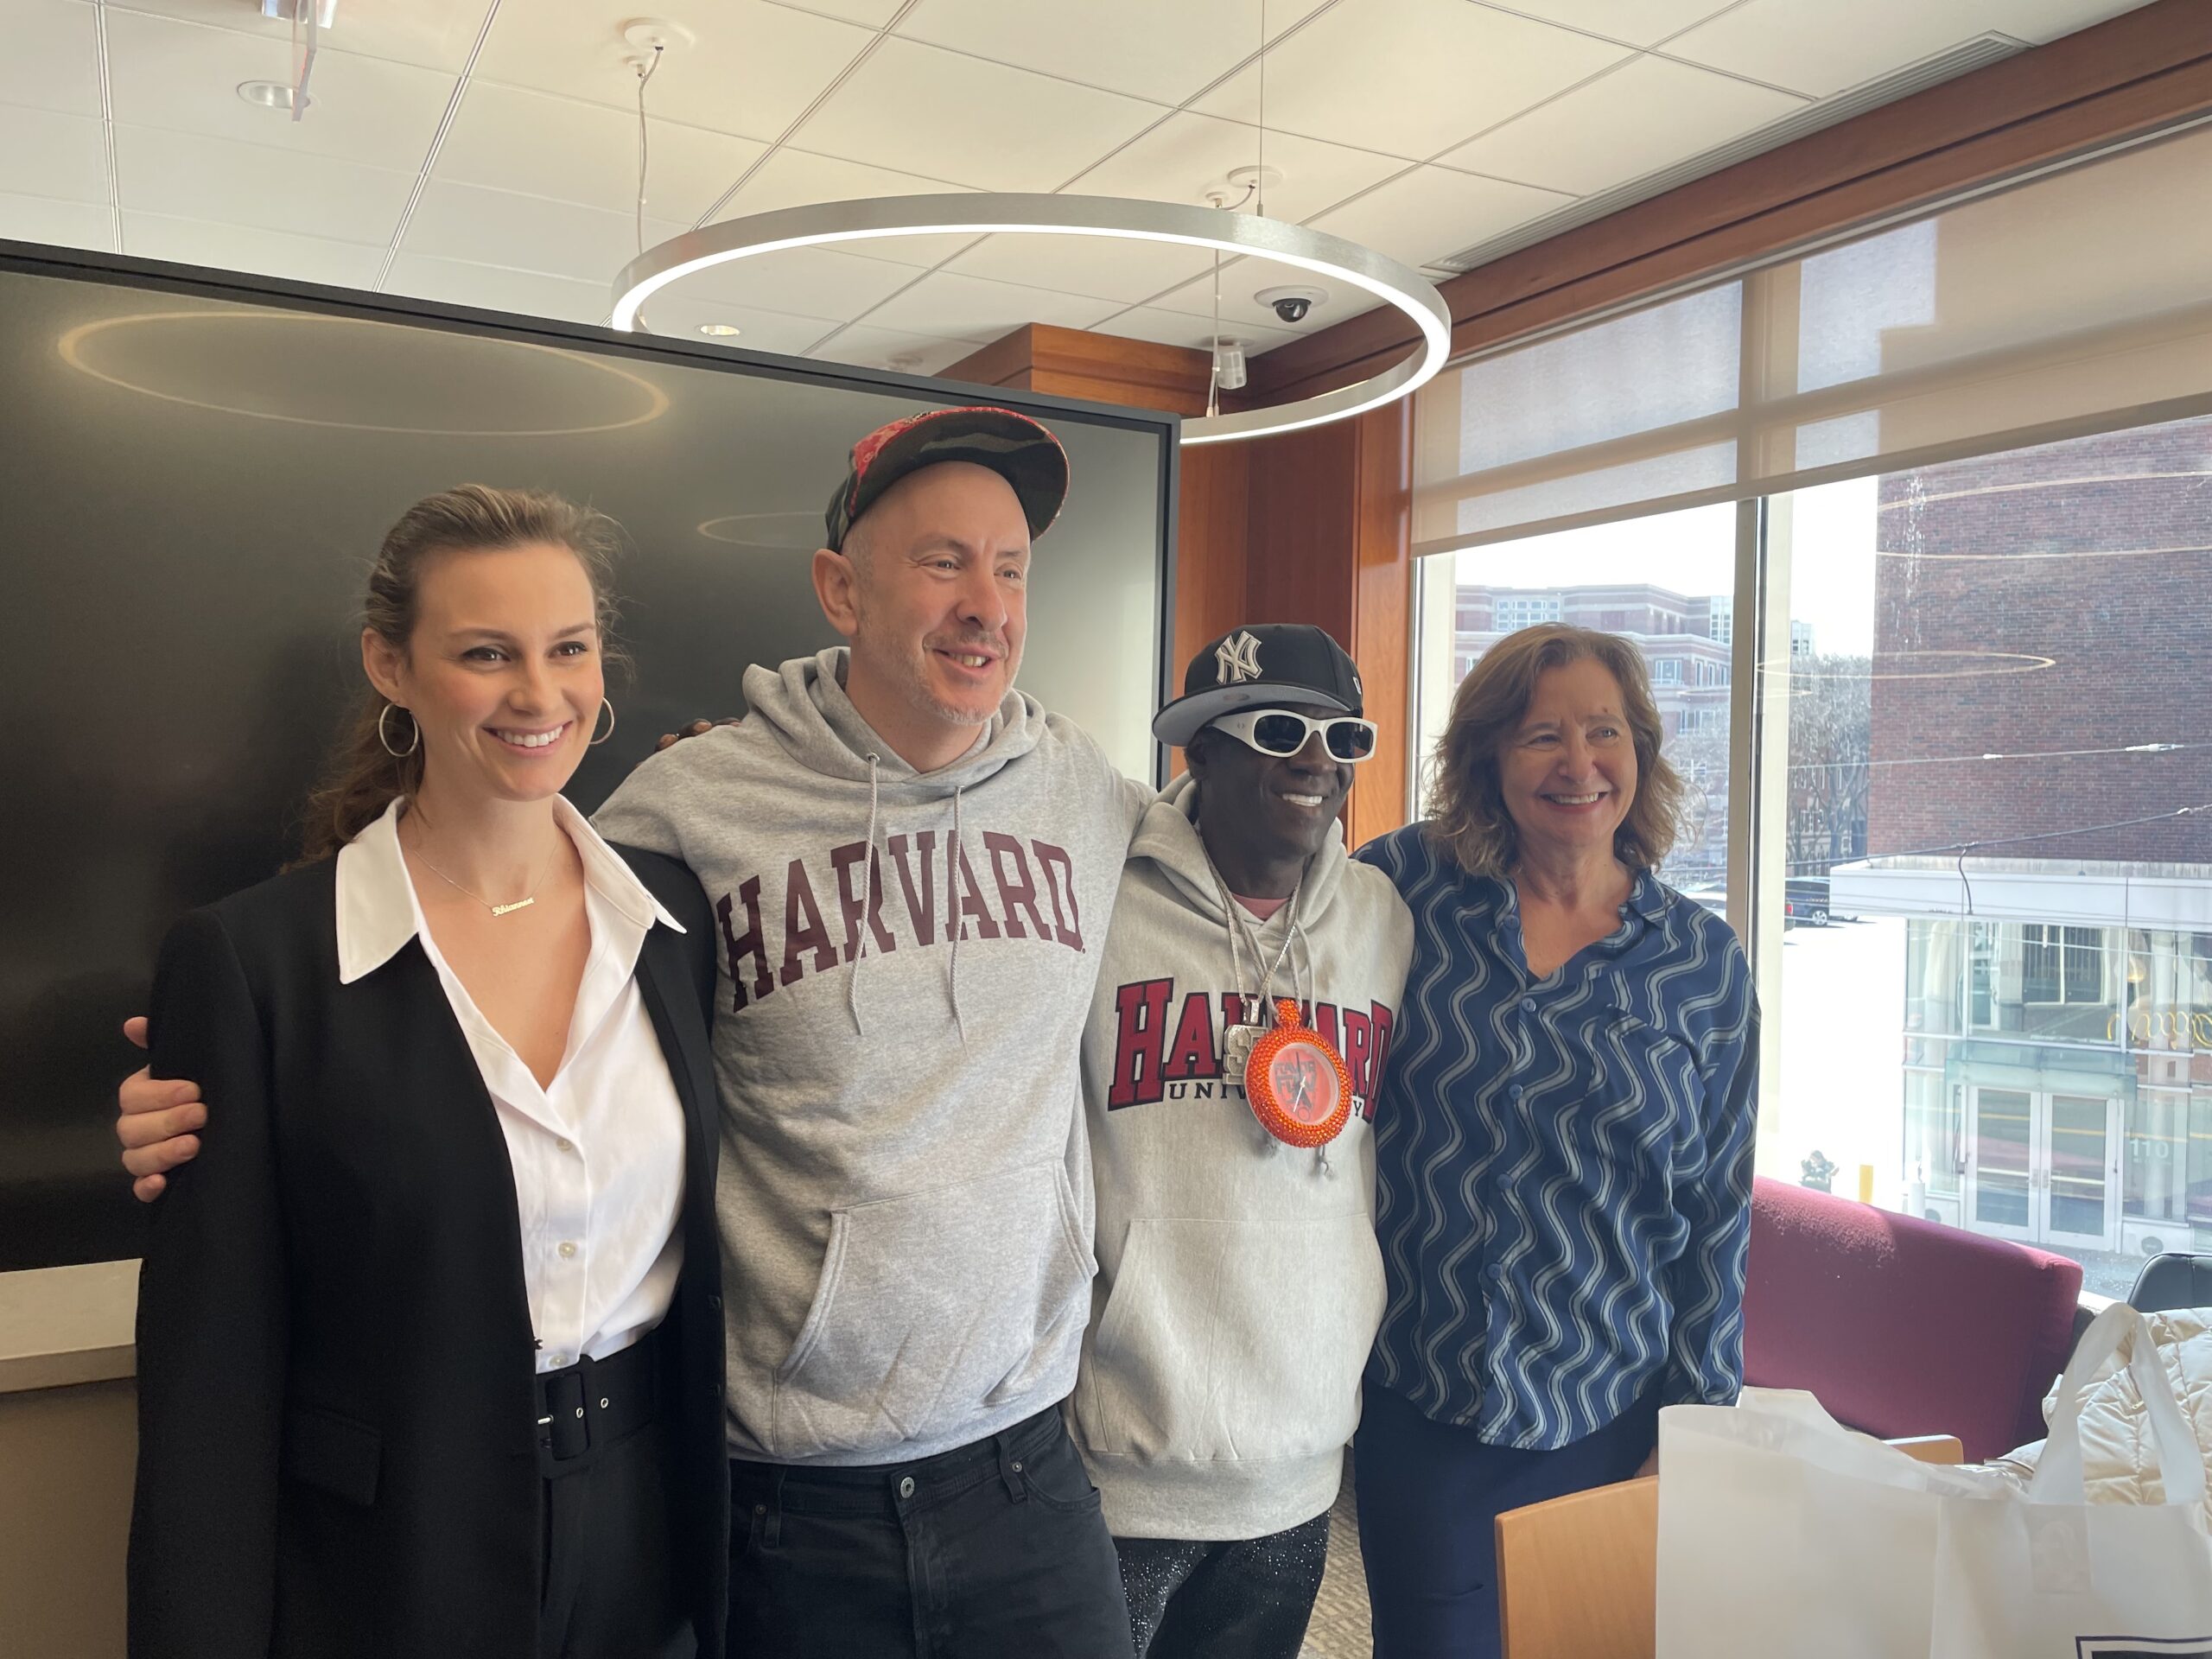 From left to right: talent manager Rhiannon Rae Ellis, songwriter Sam Hollander, rapper Flavor Flav, and professor Elisa New at Harvard Extension School.